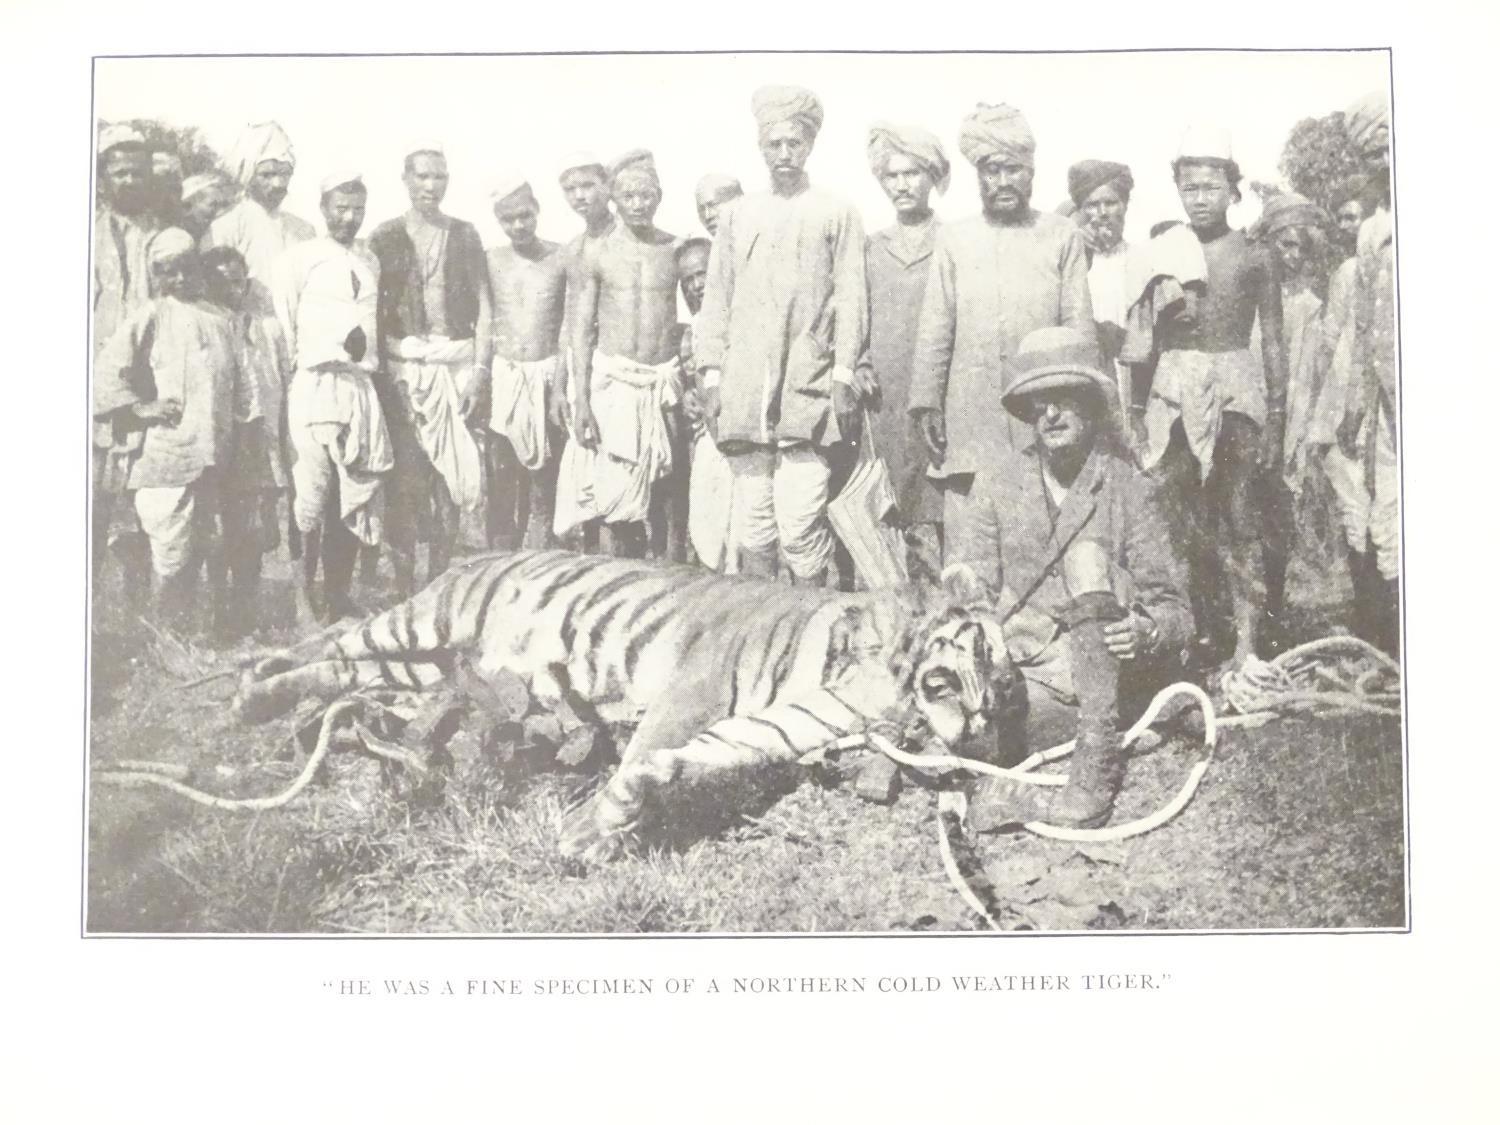 Book: First Edition copy of 'Days and Nights with Indian Big Game' by Major-General A. E. Wardrop, - Image 5 of 7